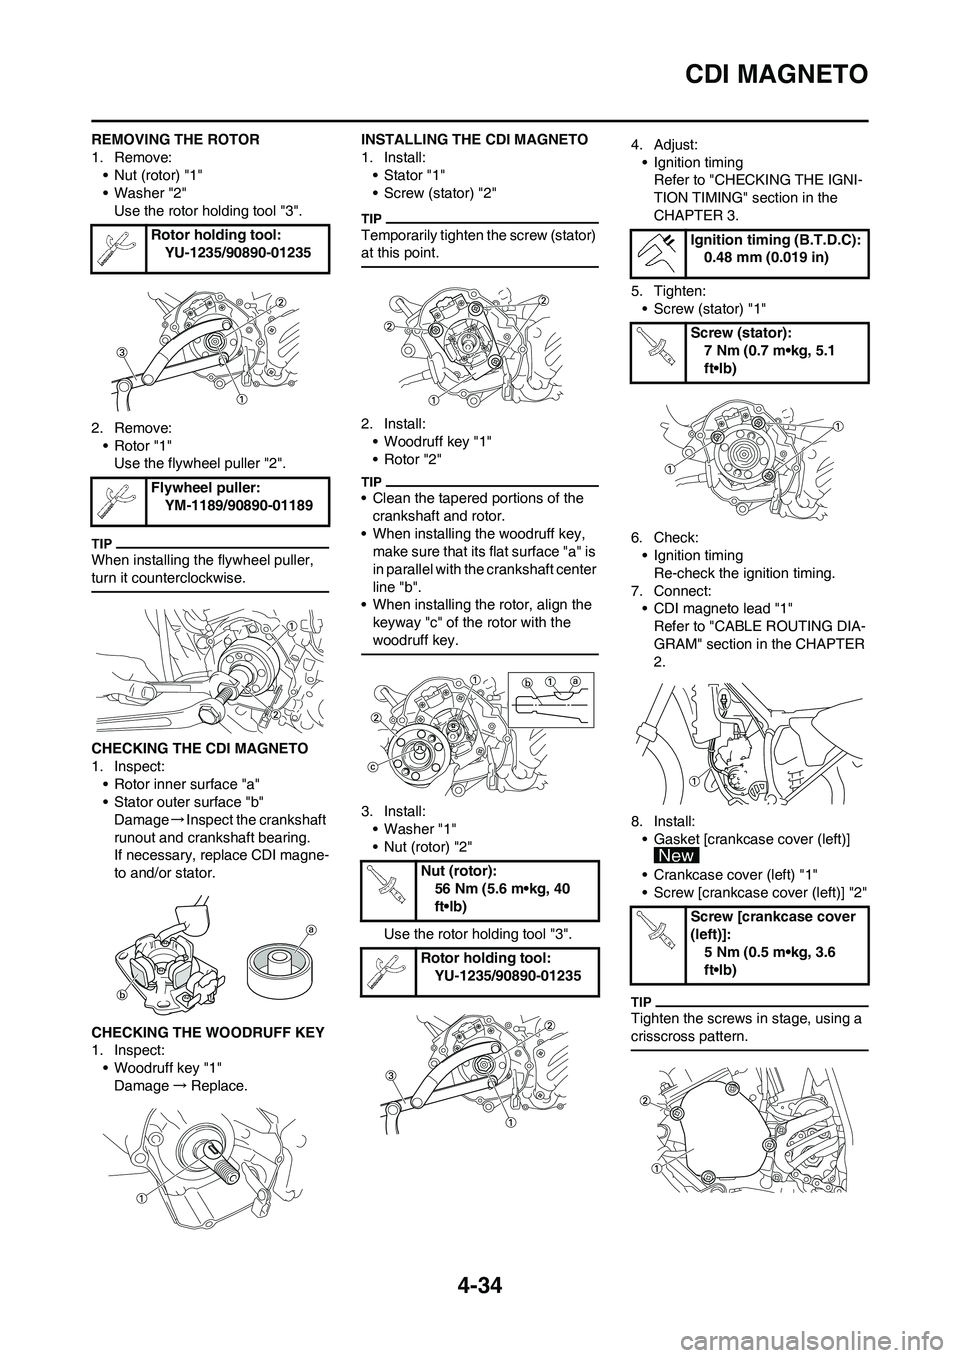 YAMAHA YZ125LC 2010  Owners Manual 4-34
CDI MAGNETO
REMOVING THE ROTOR
1. Remove:
• Nut (rotor) "1"
• Washer "2"
Use the rotor holding tool "3".
2. Remove:
• Rotor "1"
Use the flywheel puller "2".
When installing the flywheel pul